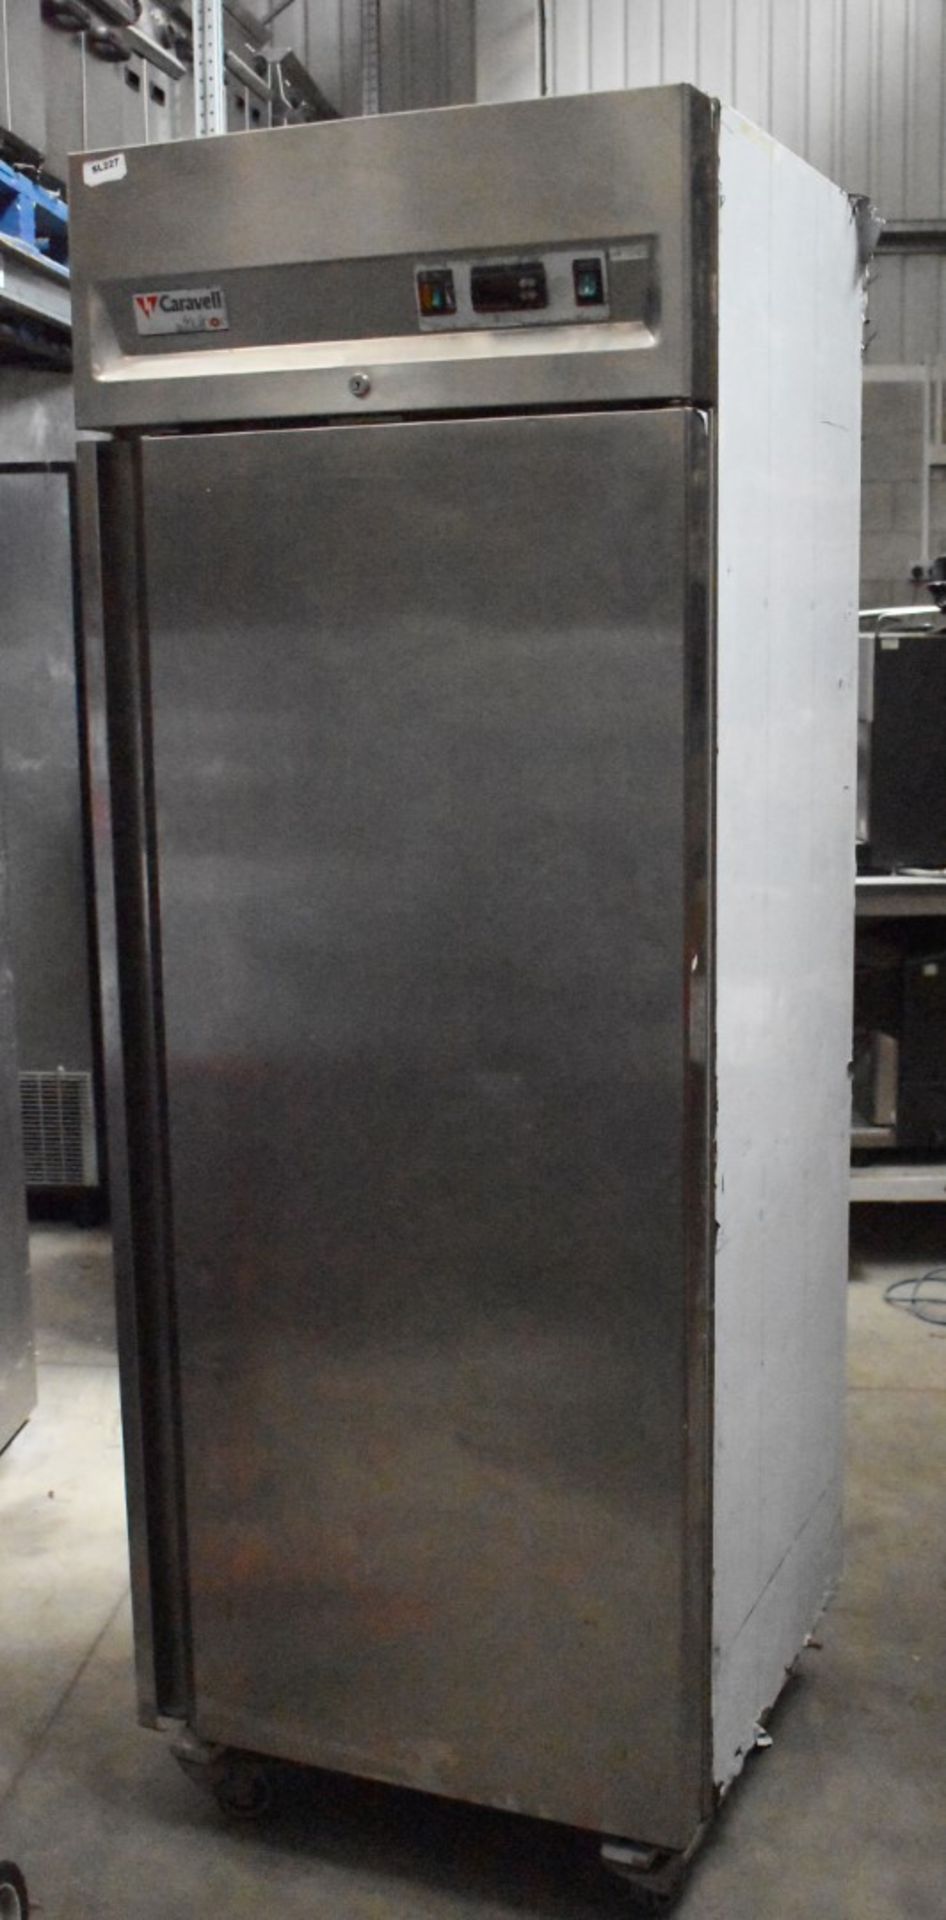 1 x Caravell by Friulinox AR6-2 Commercial Upright Refrigerator - Dimensions: H199 x W71 x D70 cms - - Image 5 of 9